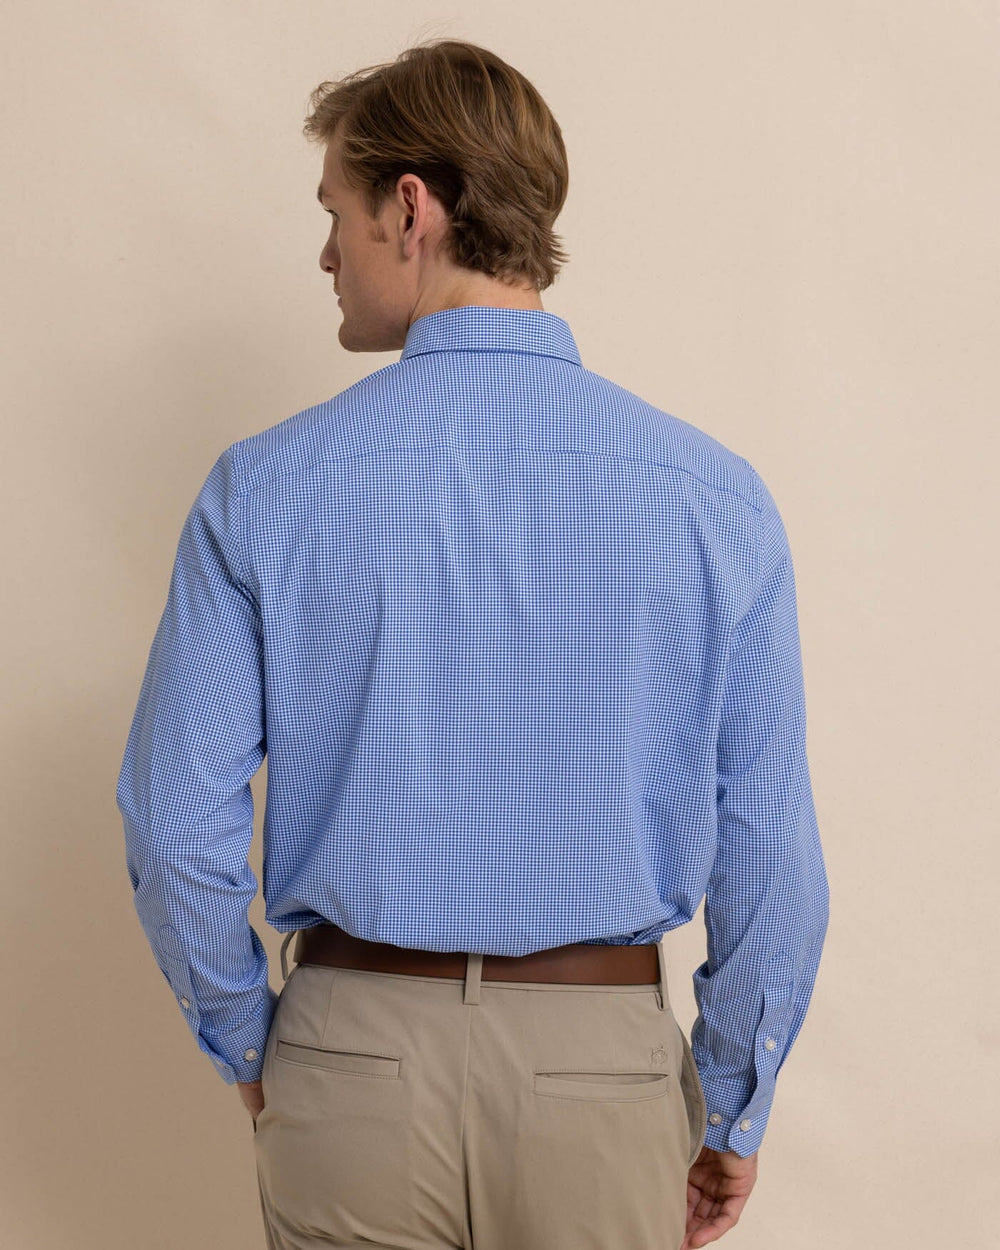 The back view of the Southern Tide Charleston Parkwood Microgingham Long Sleeve Sport Shirt by Southern Tide - Cobalt Blue